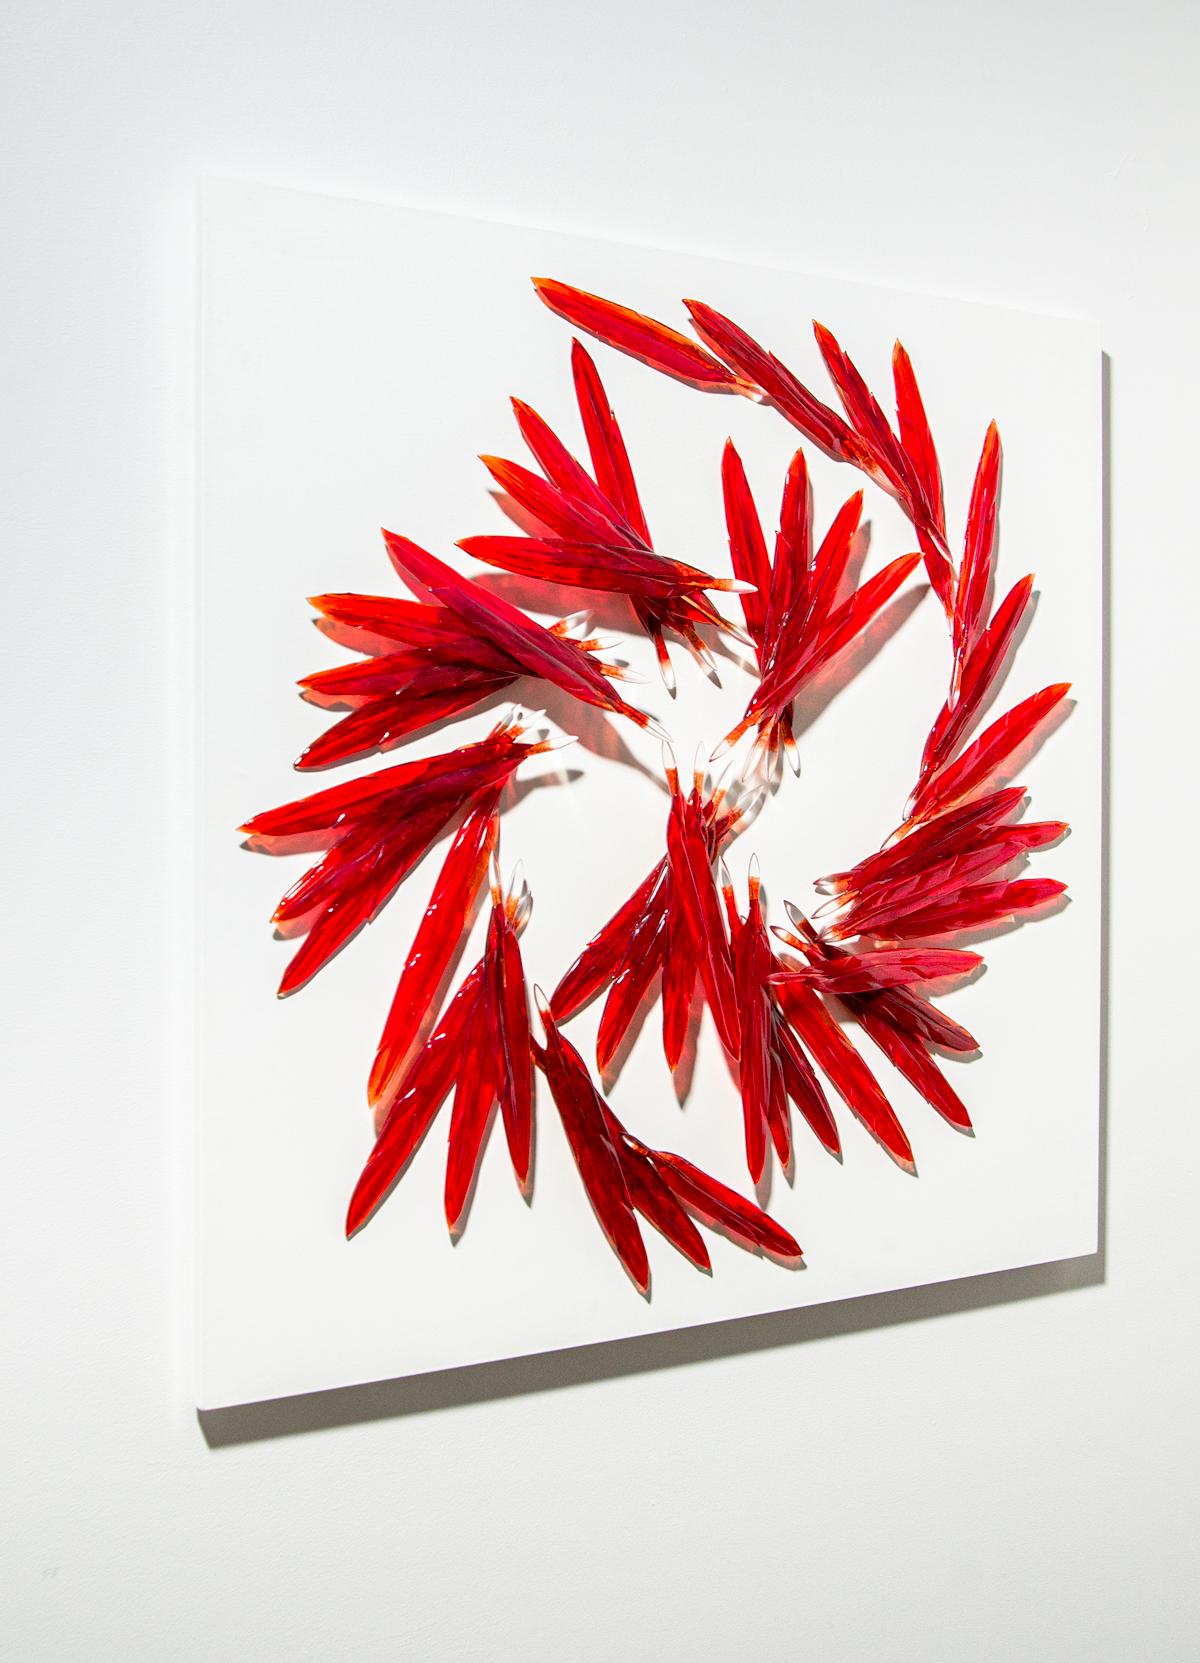 Fire Fly - large, red, translucent, feathers, solid glass wall sculpture - Contemporary Sculpture by John Paul Robinson